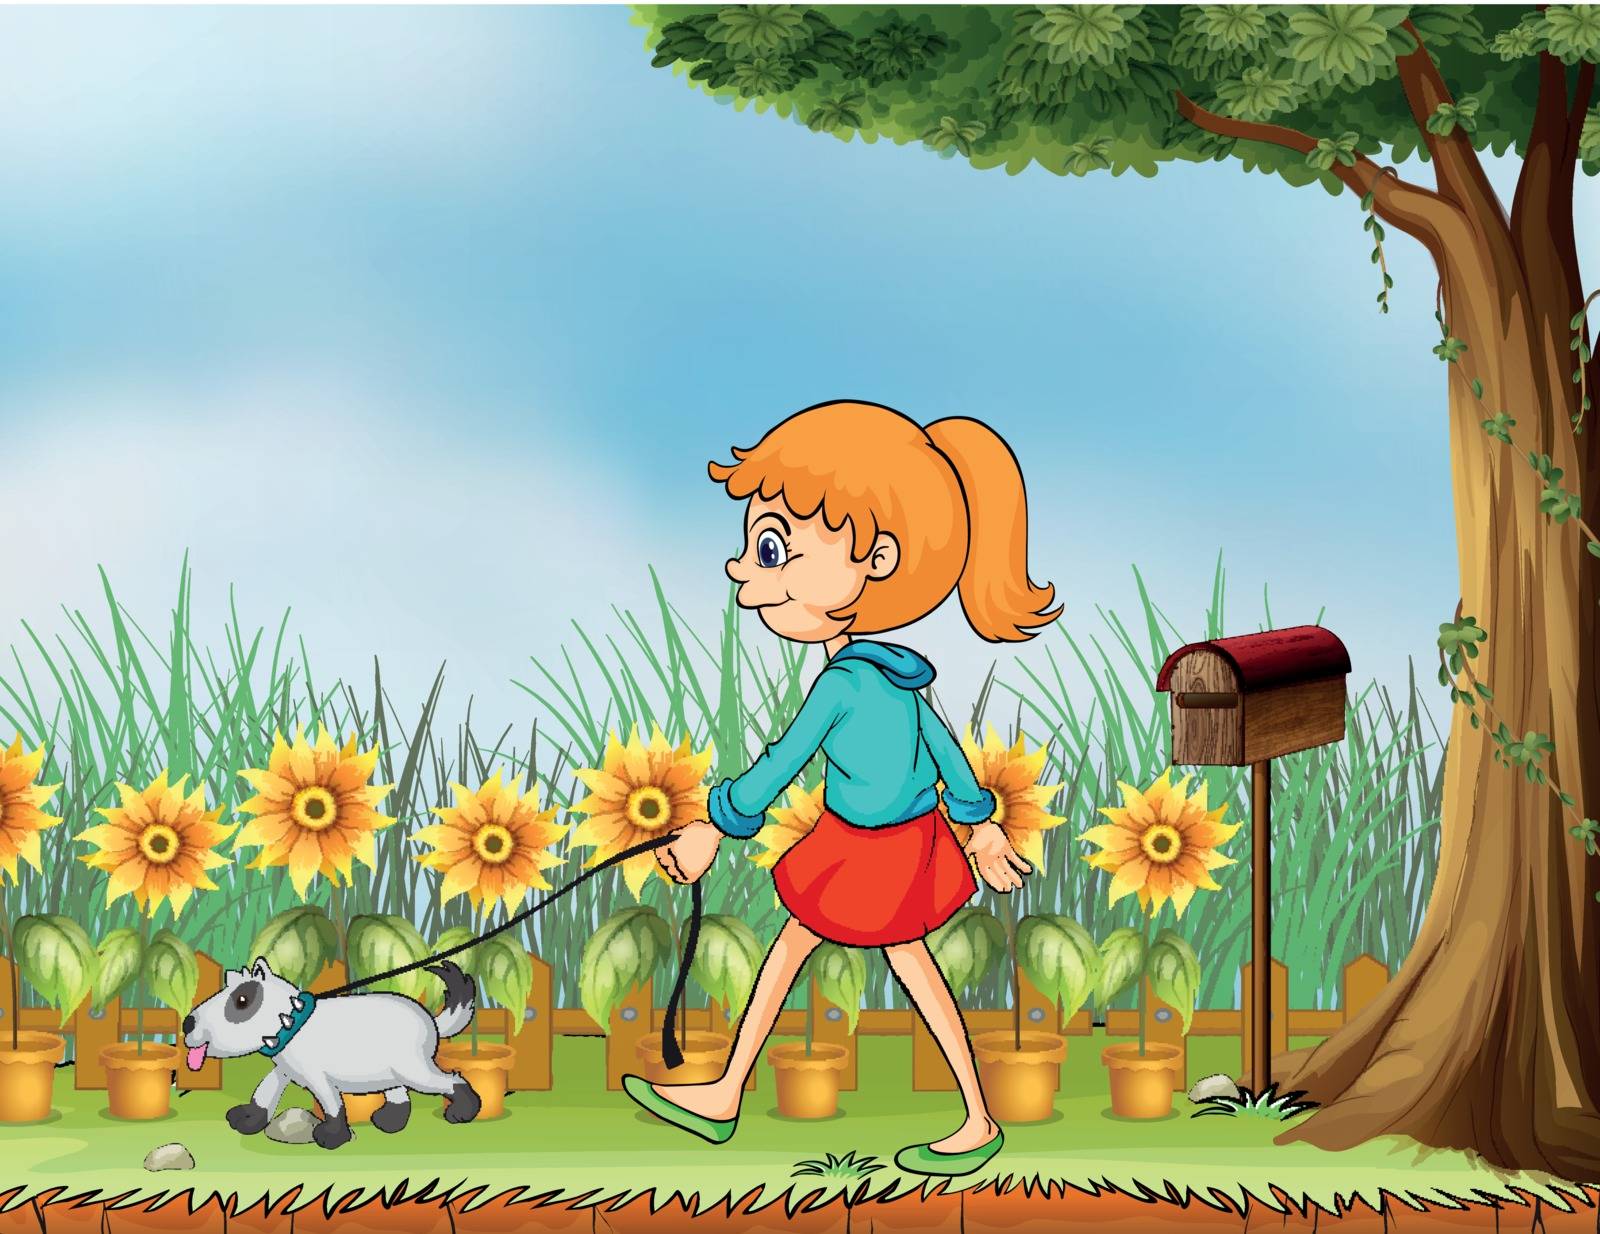 Illustration of a girl with her pet in the garden